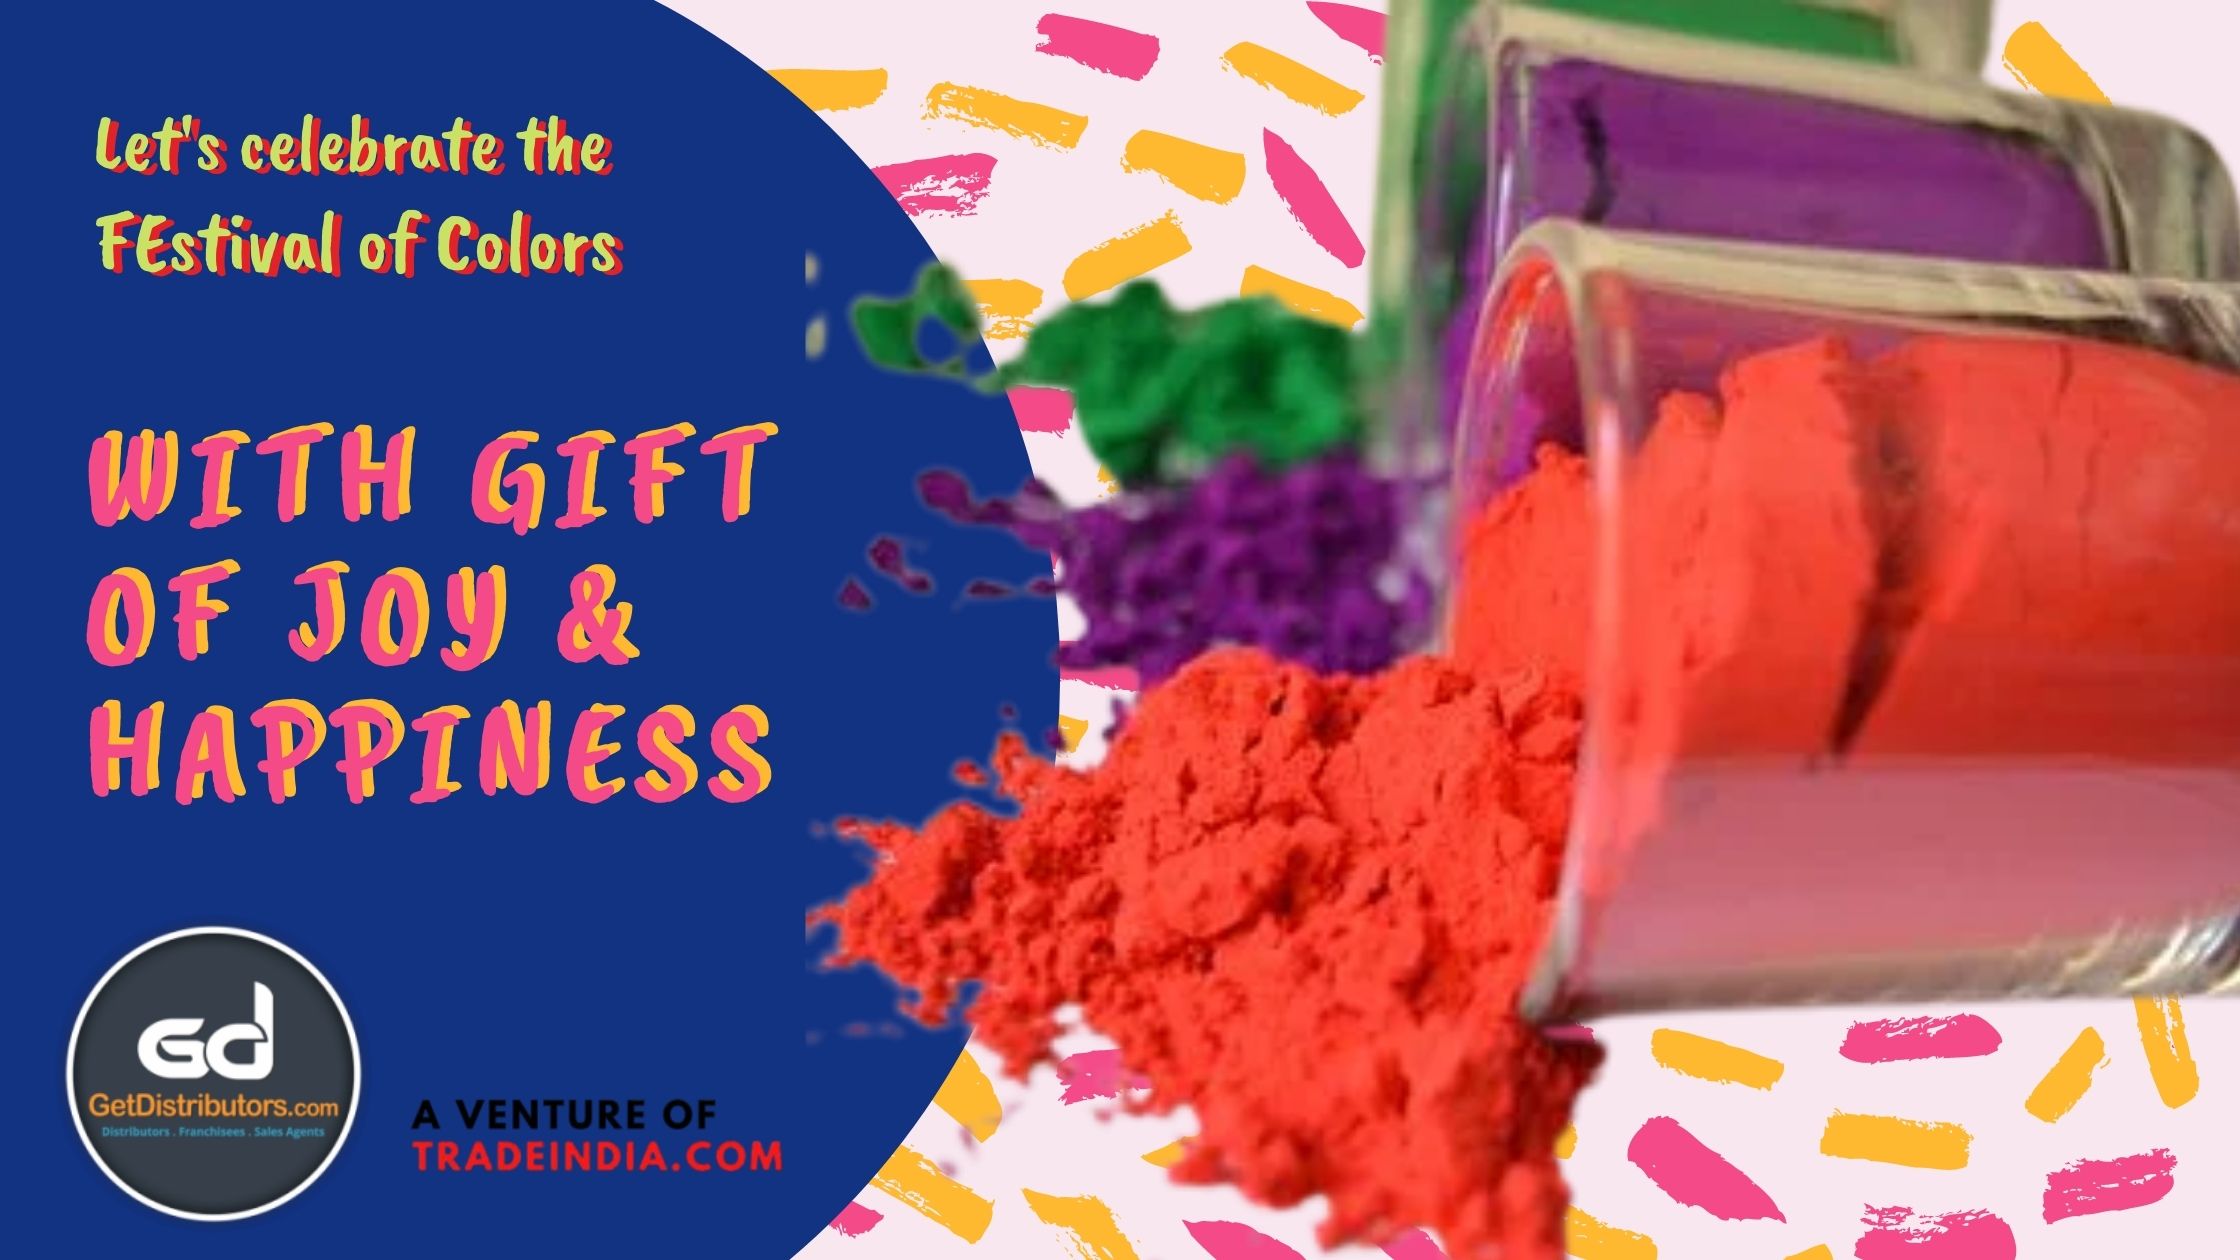 Innovative Holi Gifts for Spreading Colors of Joy and Happiness